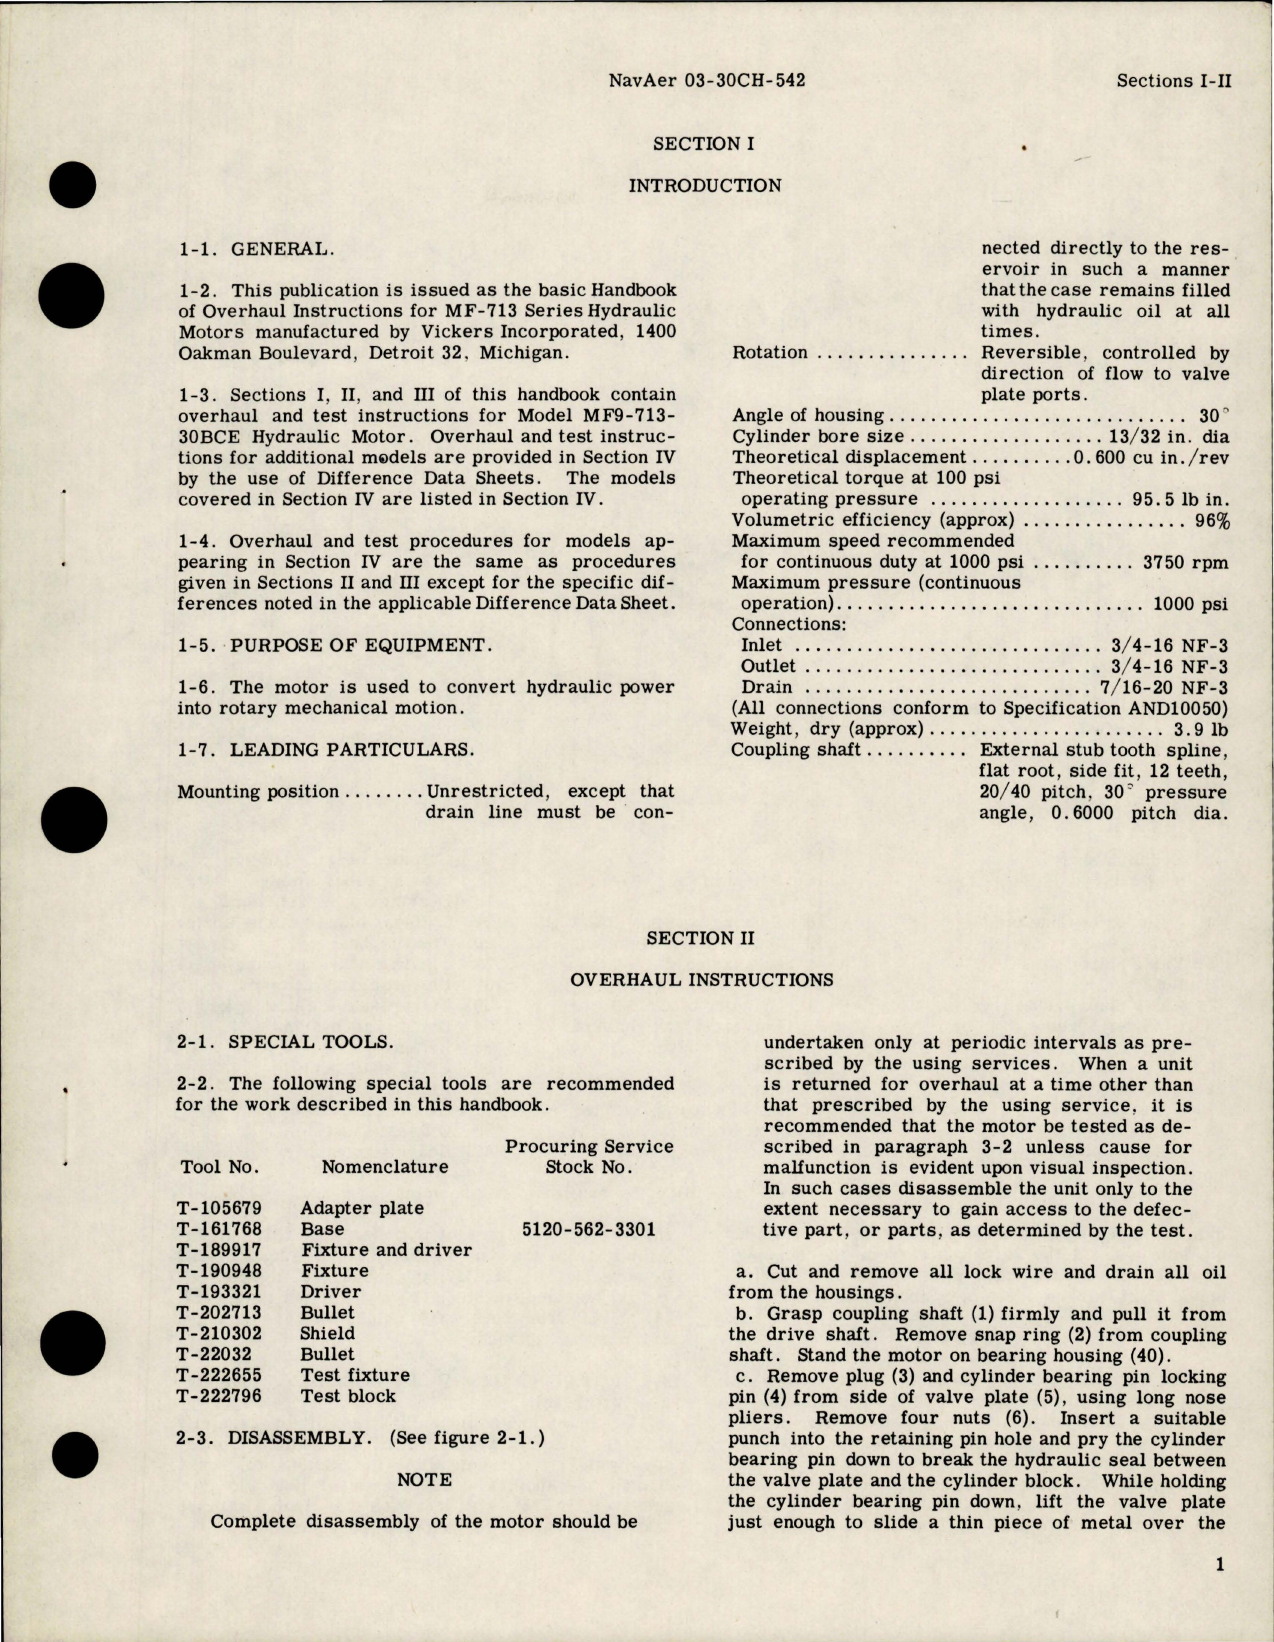 Sample page 5 from AirCorps Library document: Overhaul Instructions for Hydraulic Motor Assemblies